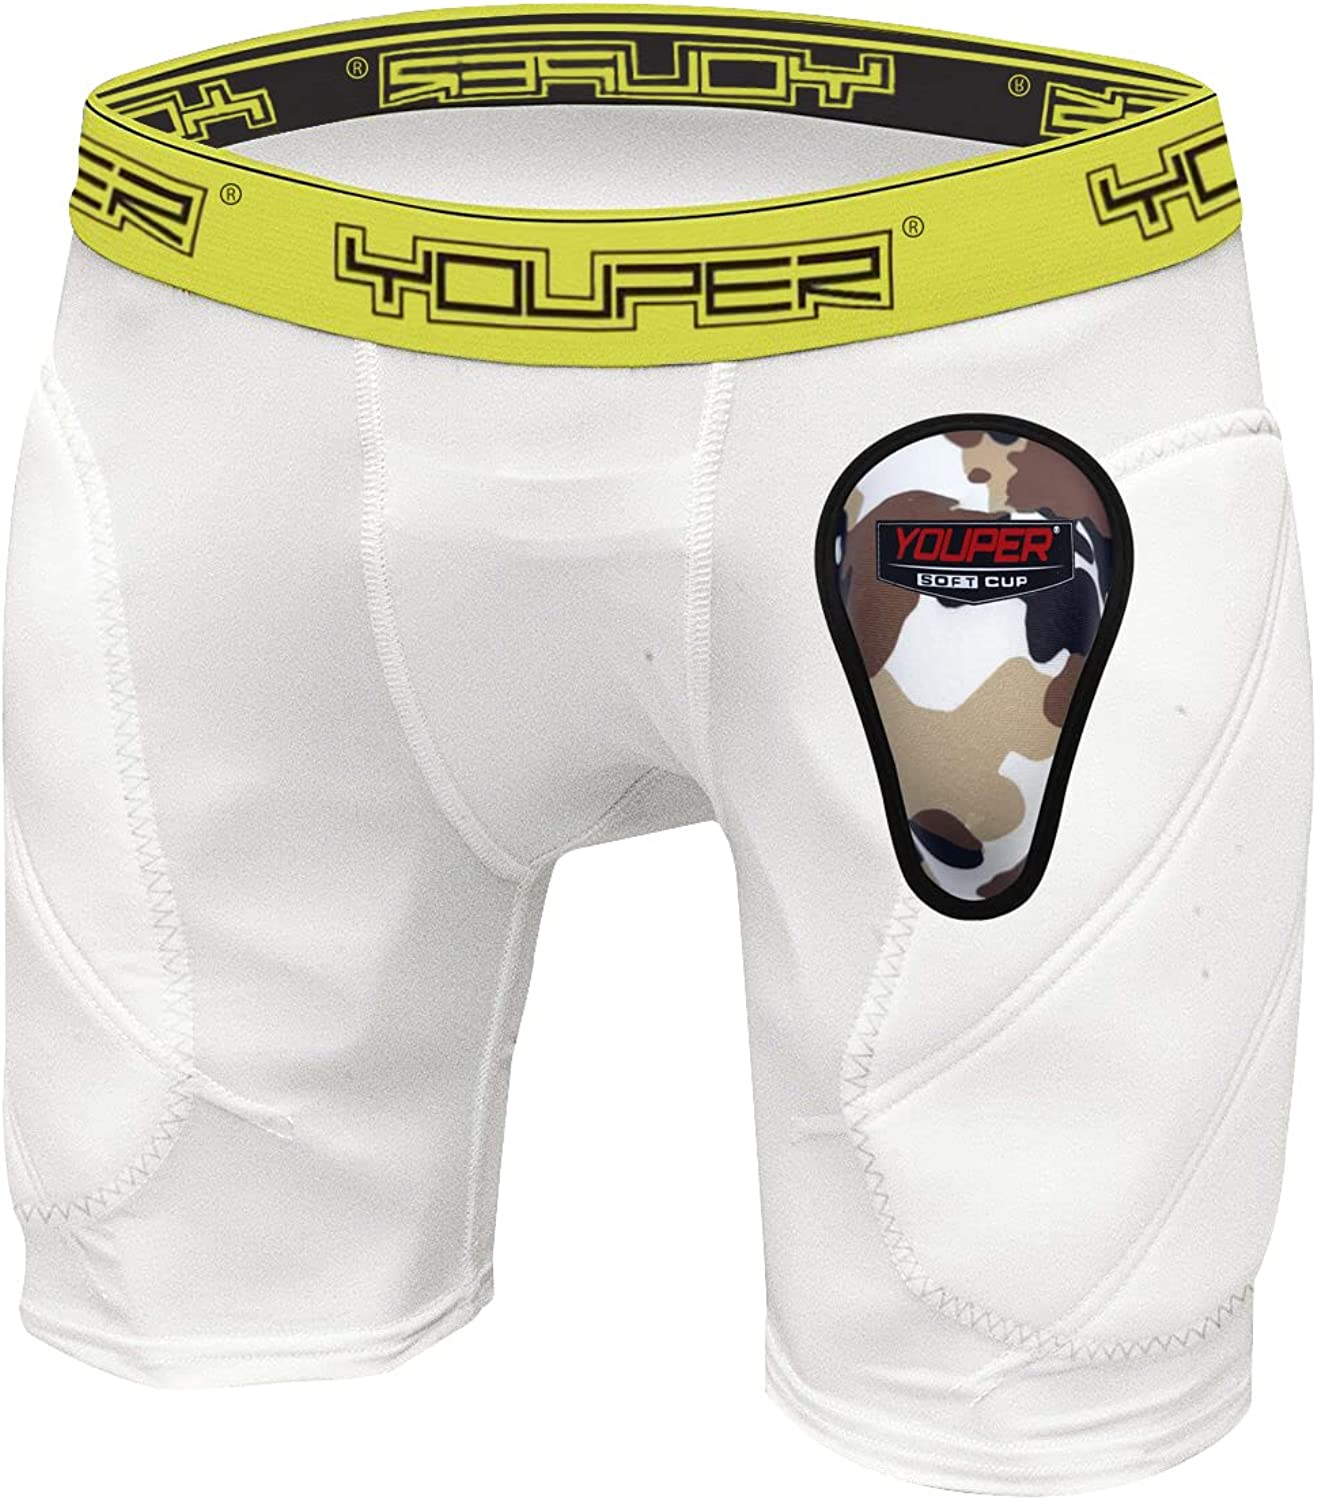 Buy Youper Boys Compression Brief with Soft Protective Athletic